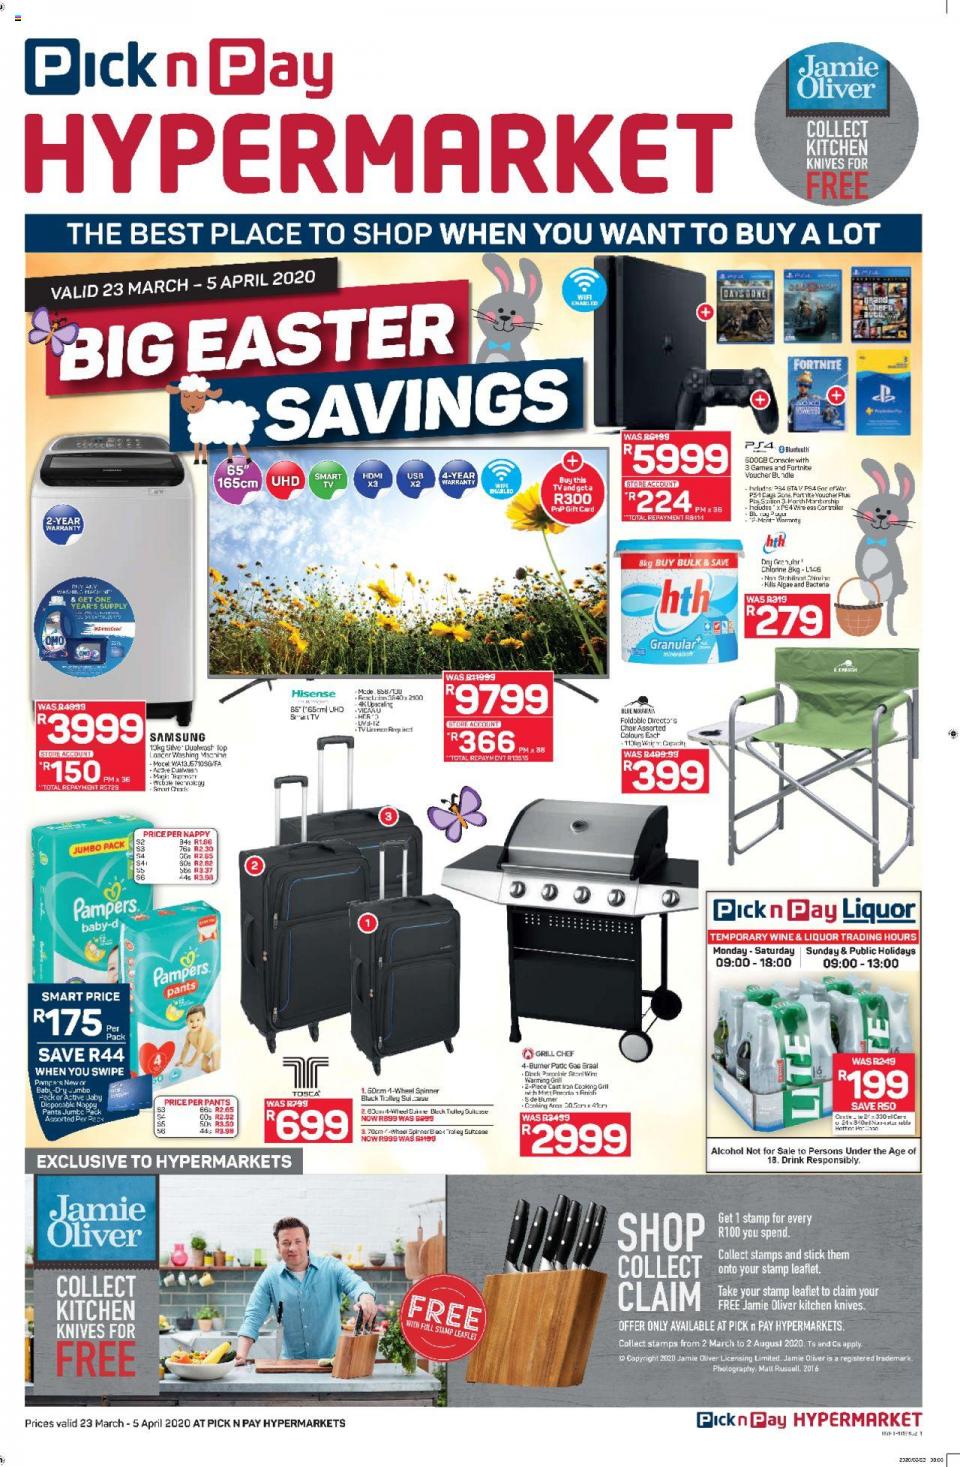 Pick n Pay Specials Big Easter Savings Hypermarkets 23 March 2020